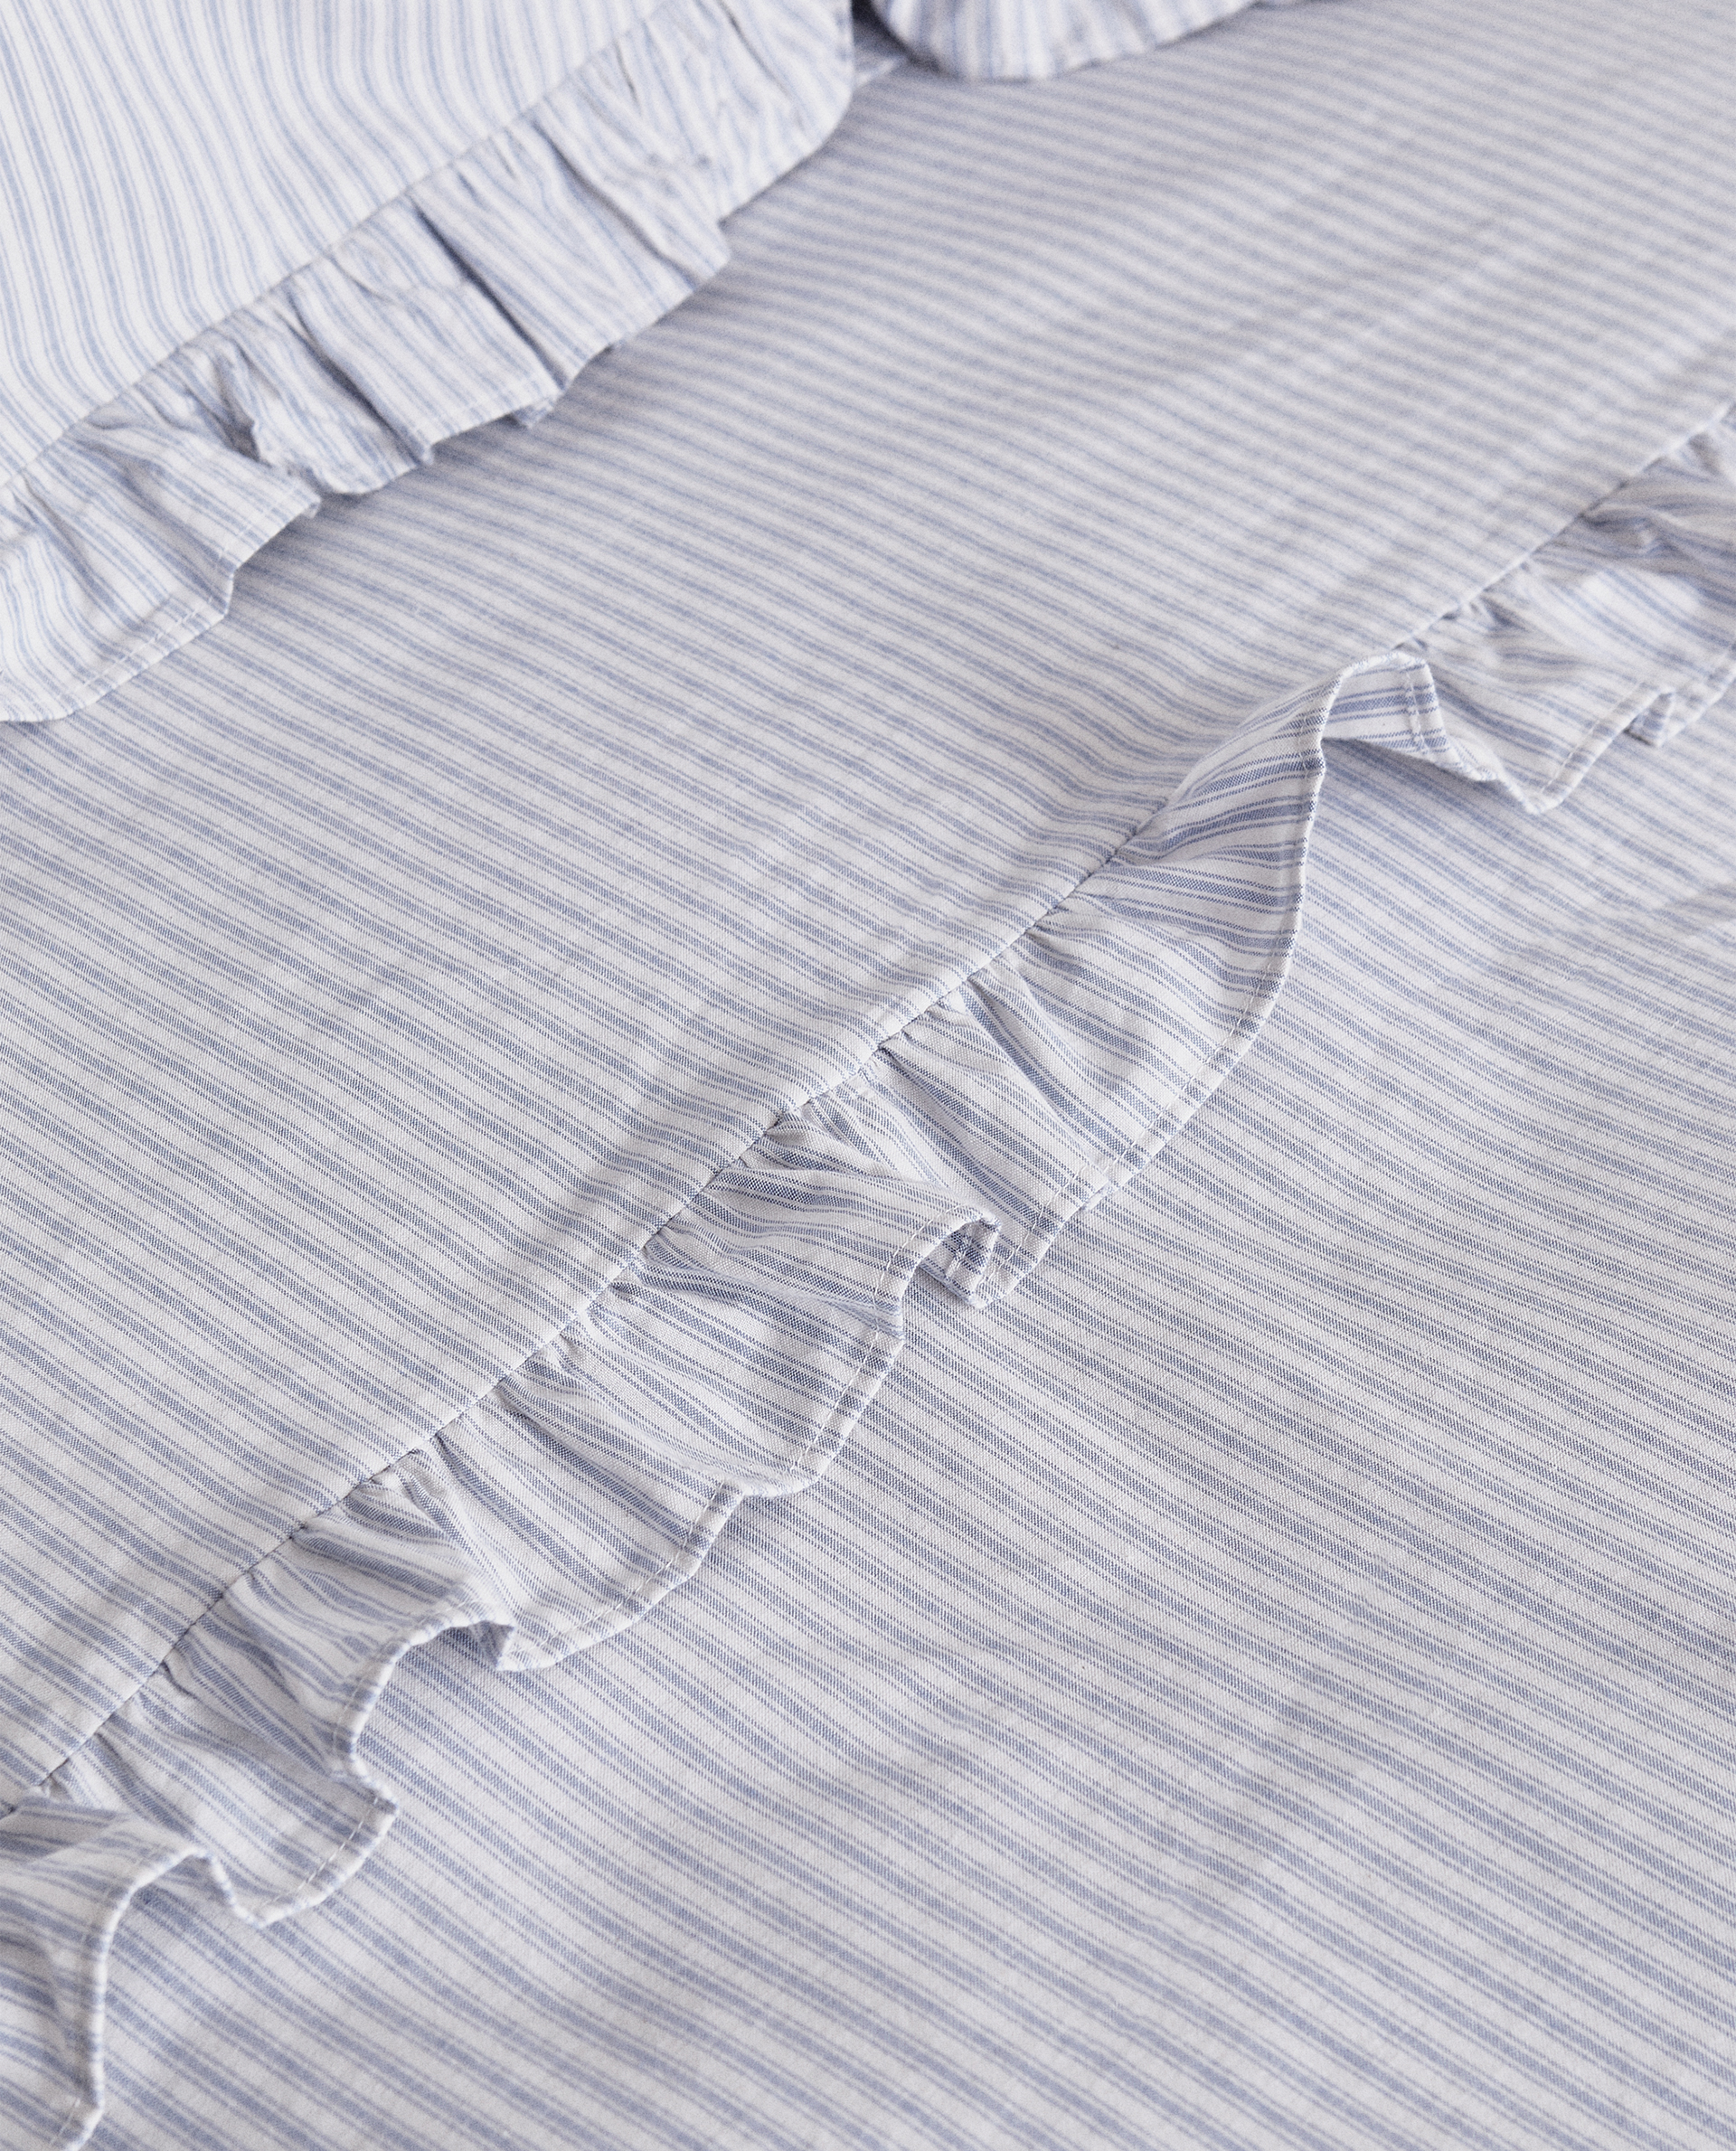 Striped And Ruffled Duvet Cover Duvet Covers Bed Linen